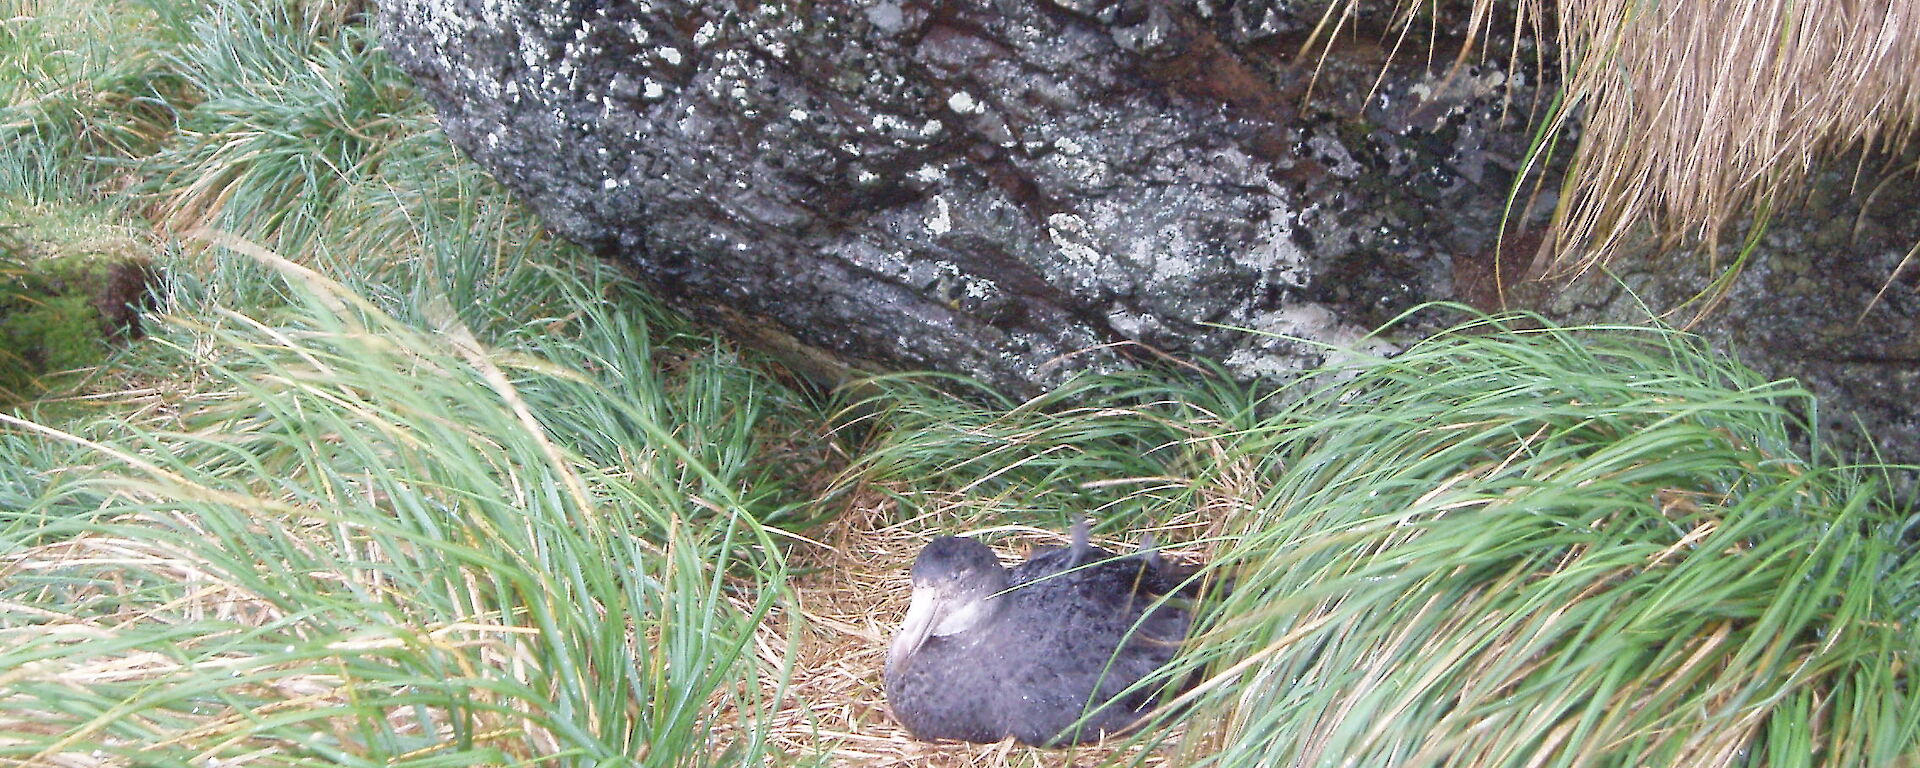 Northern giant petrel adult bird on the nest with an egg in September